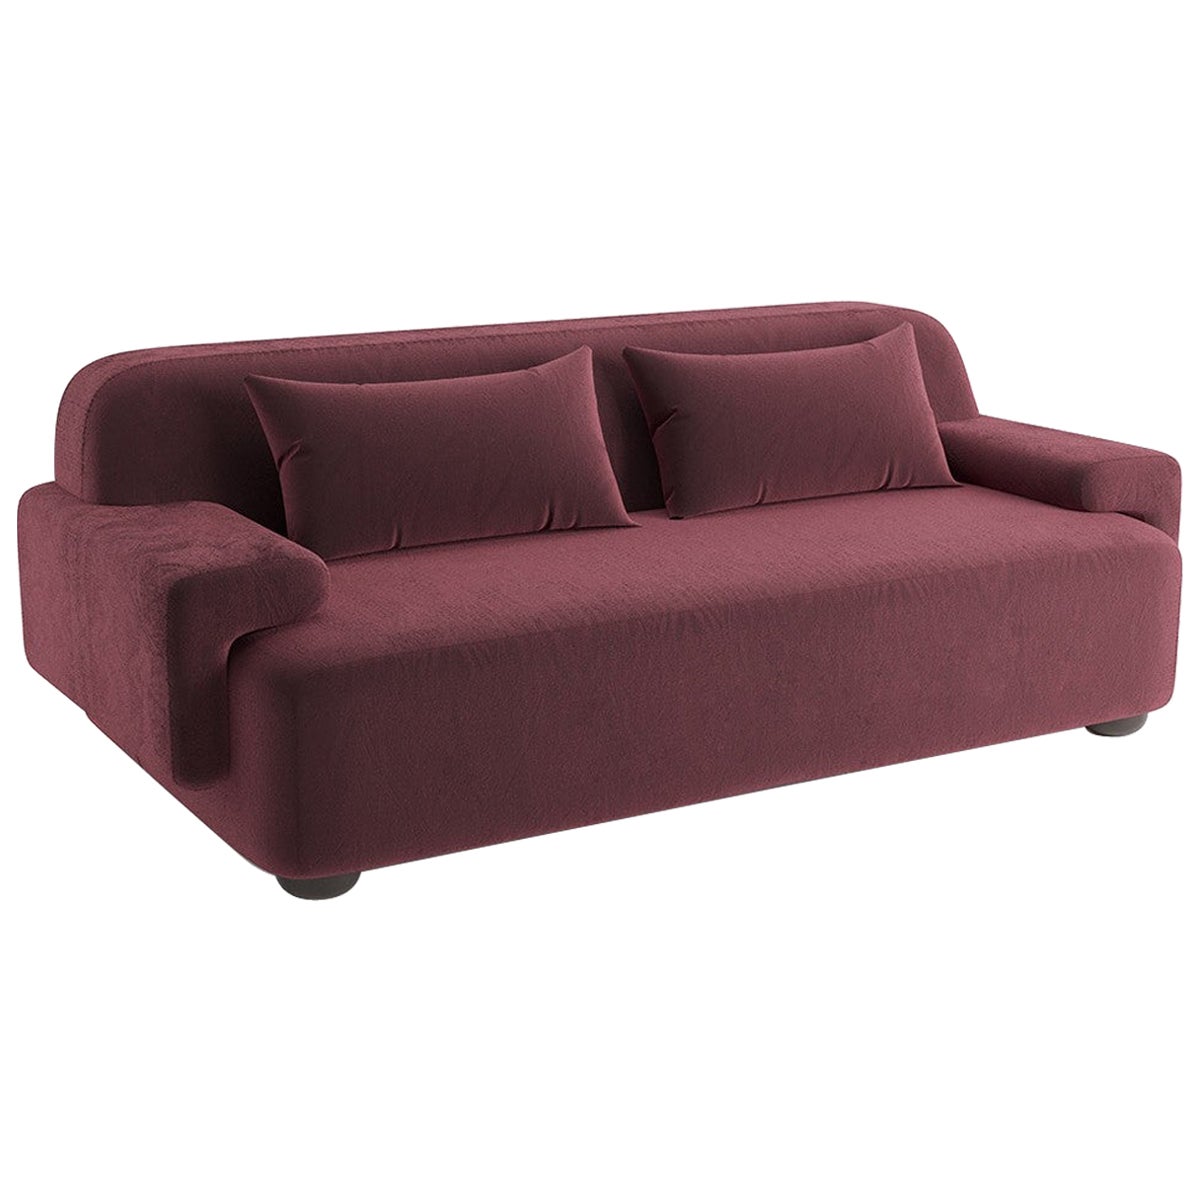 Popus Editions Lena 4 Seater Sofa in Red Como Velvet Upholstery For Sale